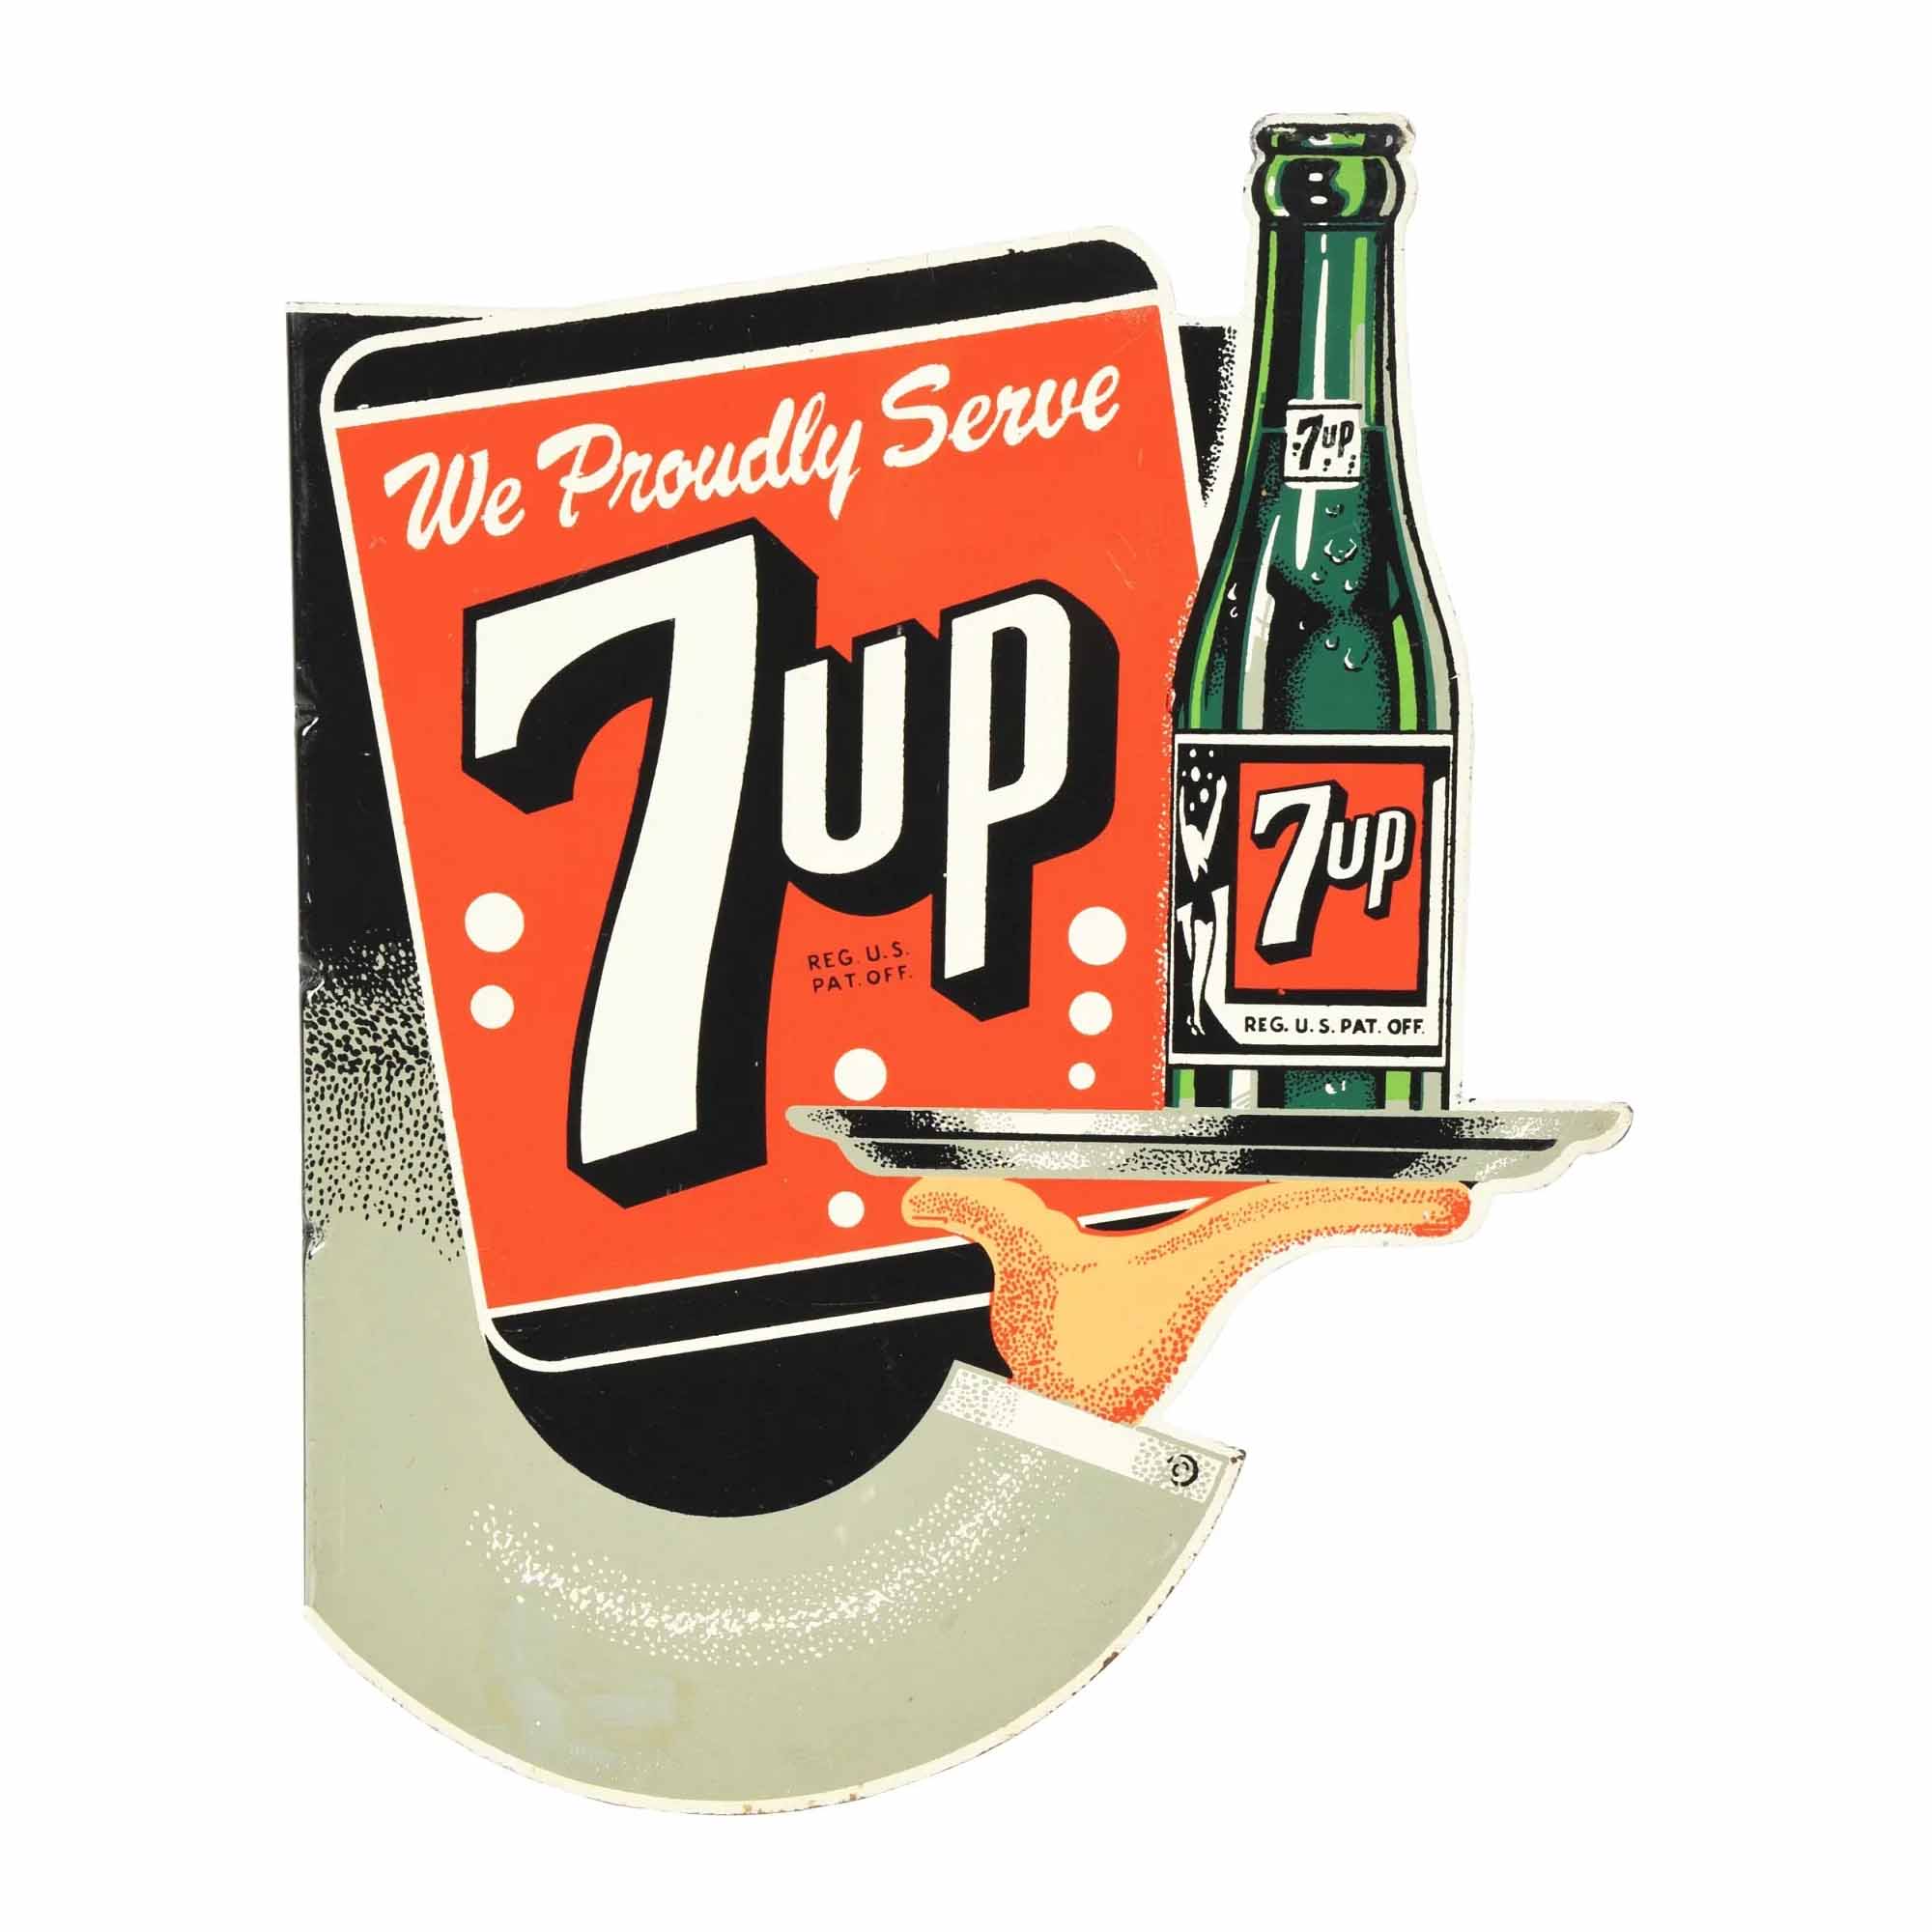 ‘We Proudly Serve 7Up’ painted-metal flange sign, estimated at $6,000-$12,000 at Morphy.